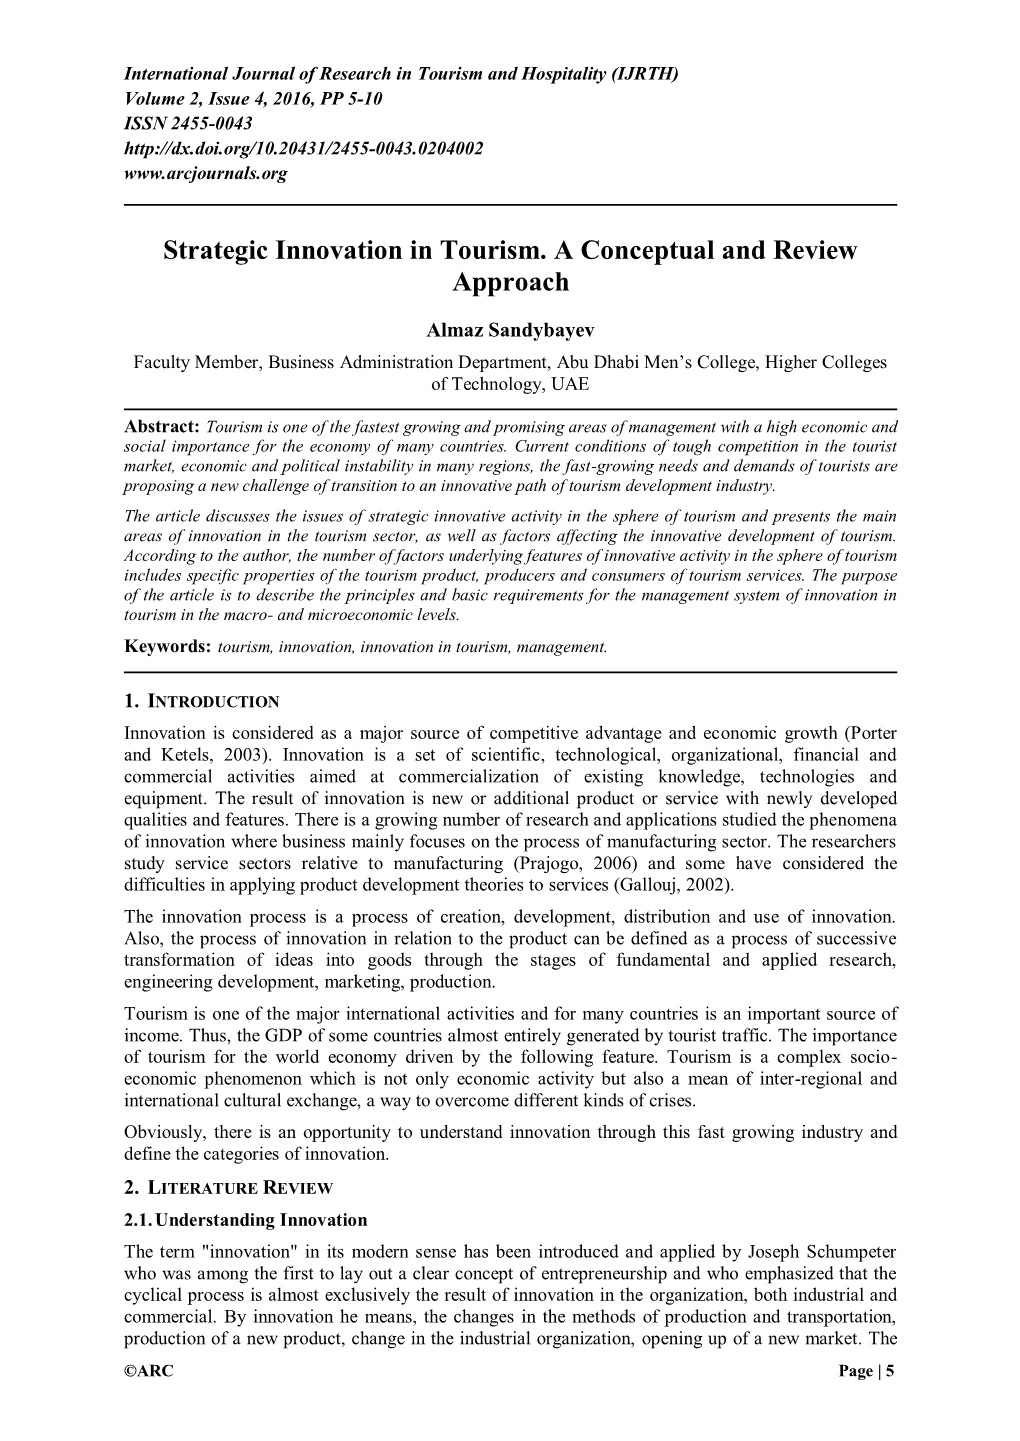 Strategic Innovation in Tourism. a Conceptual and Review Approach